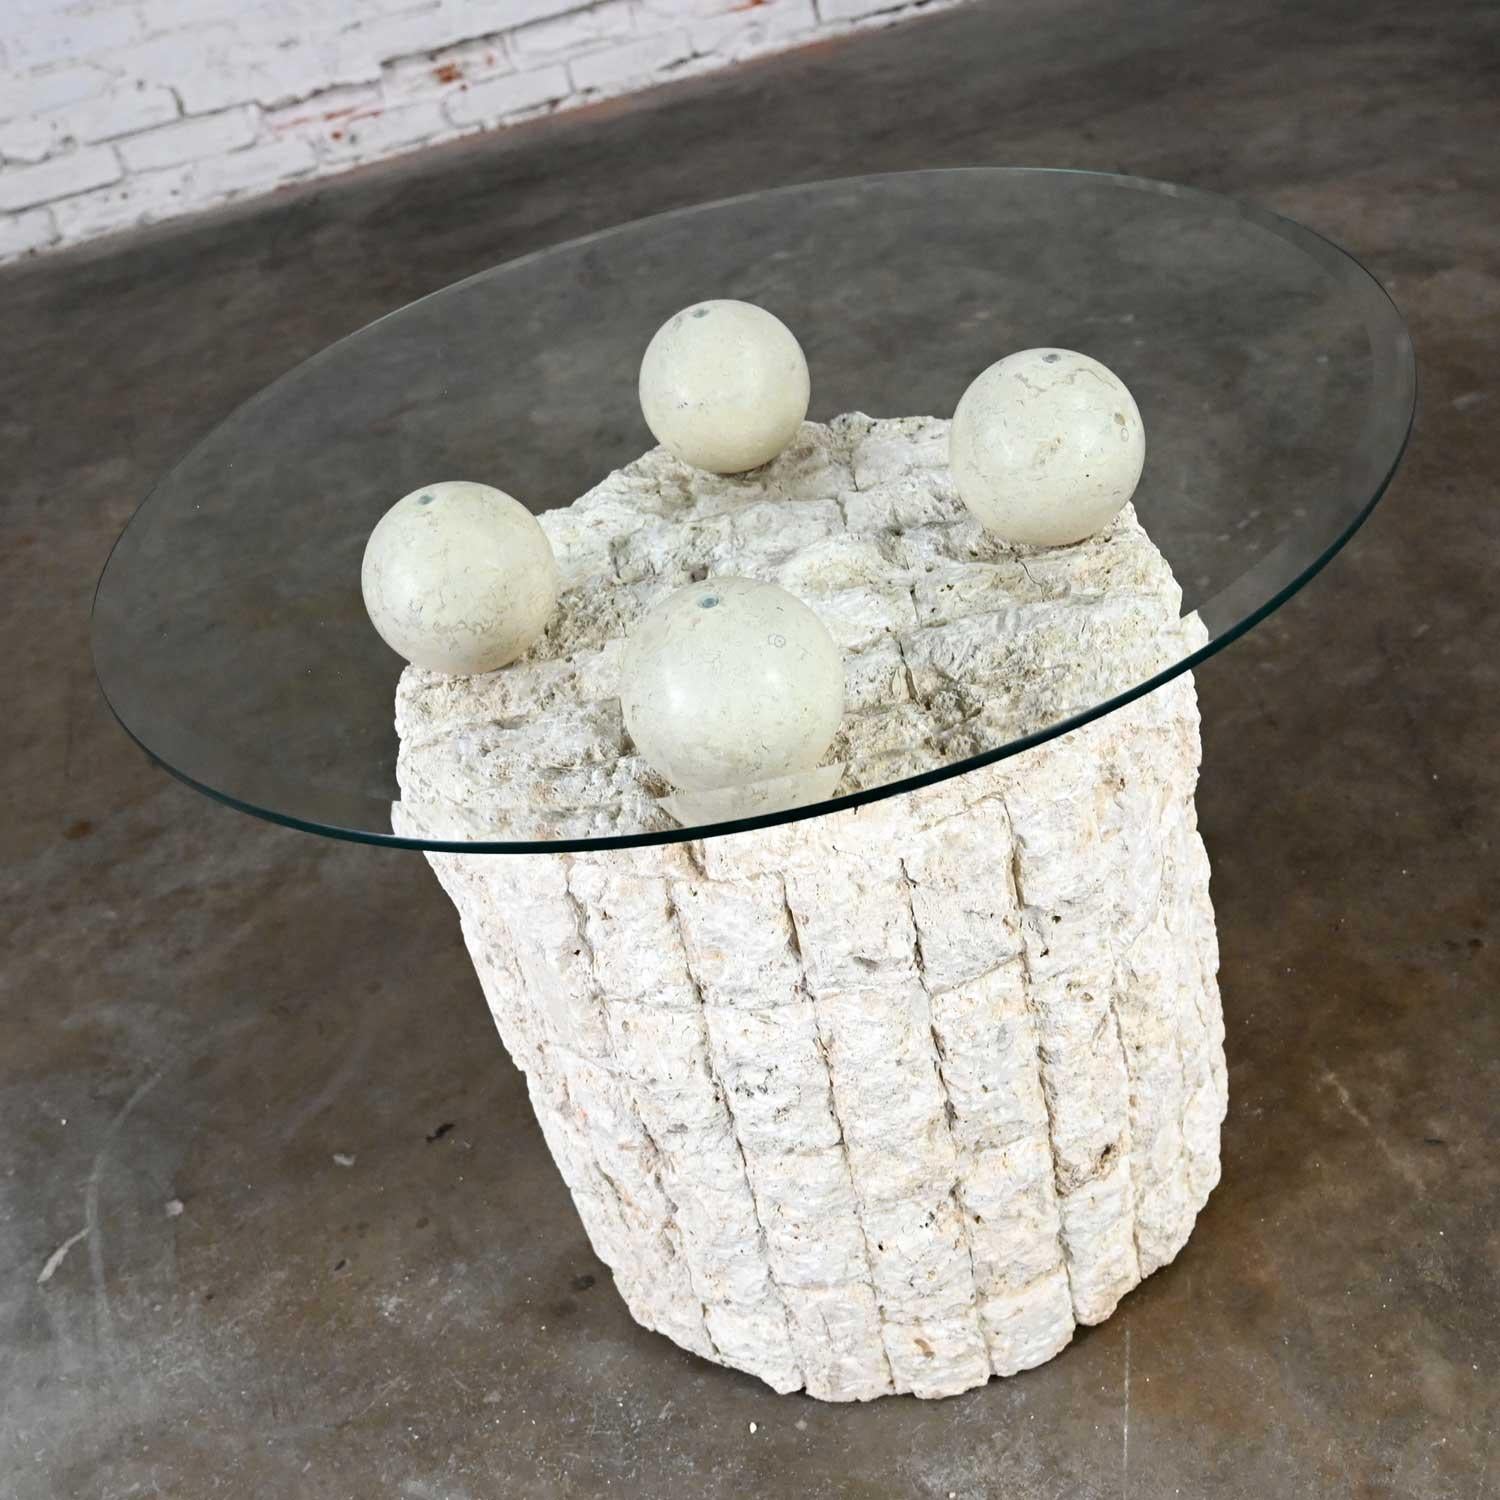 Philippine Postmodern Rnd Tessellated Mactan Stone Side Table 4 Sphere Style Maitland Smith For Sale